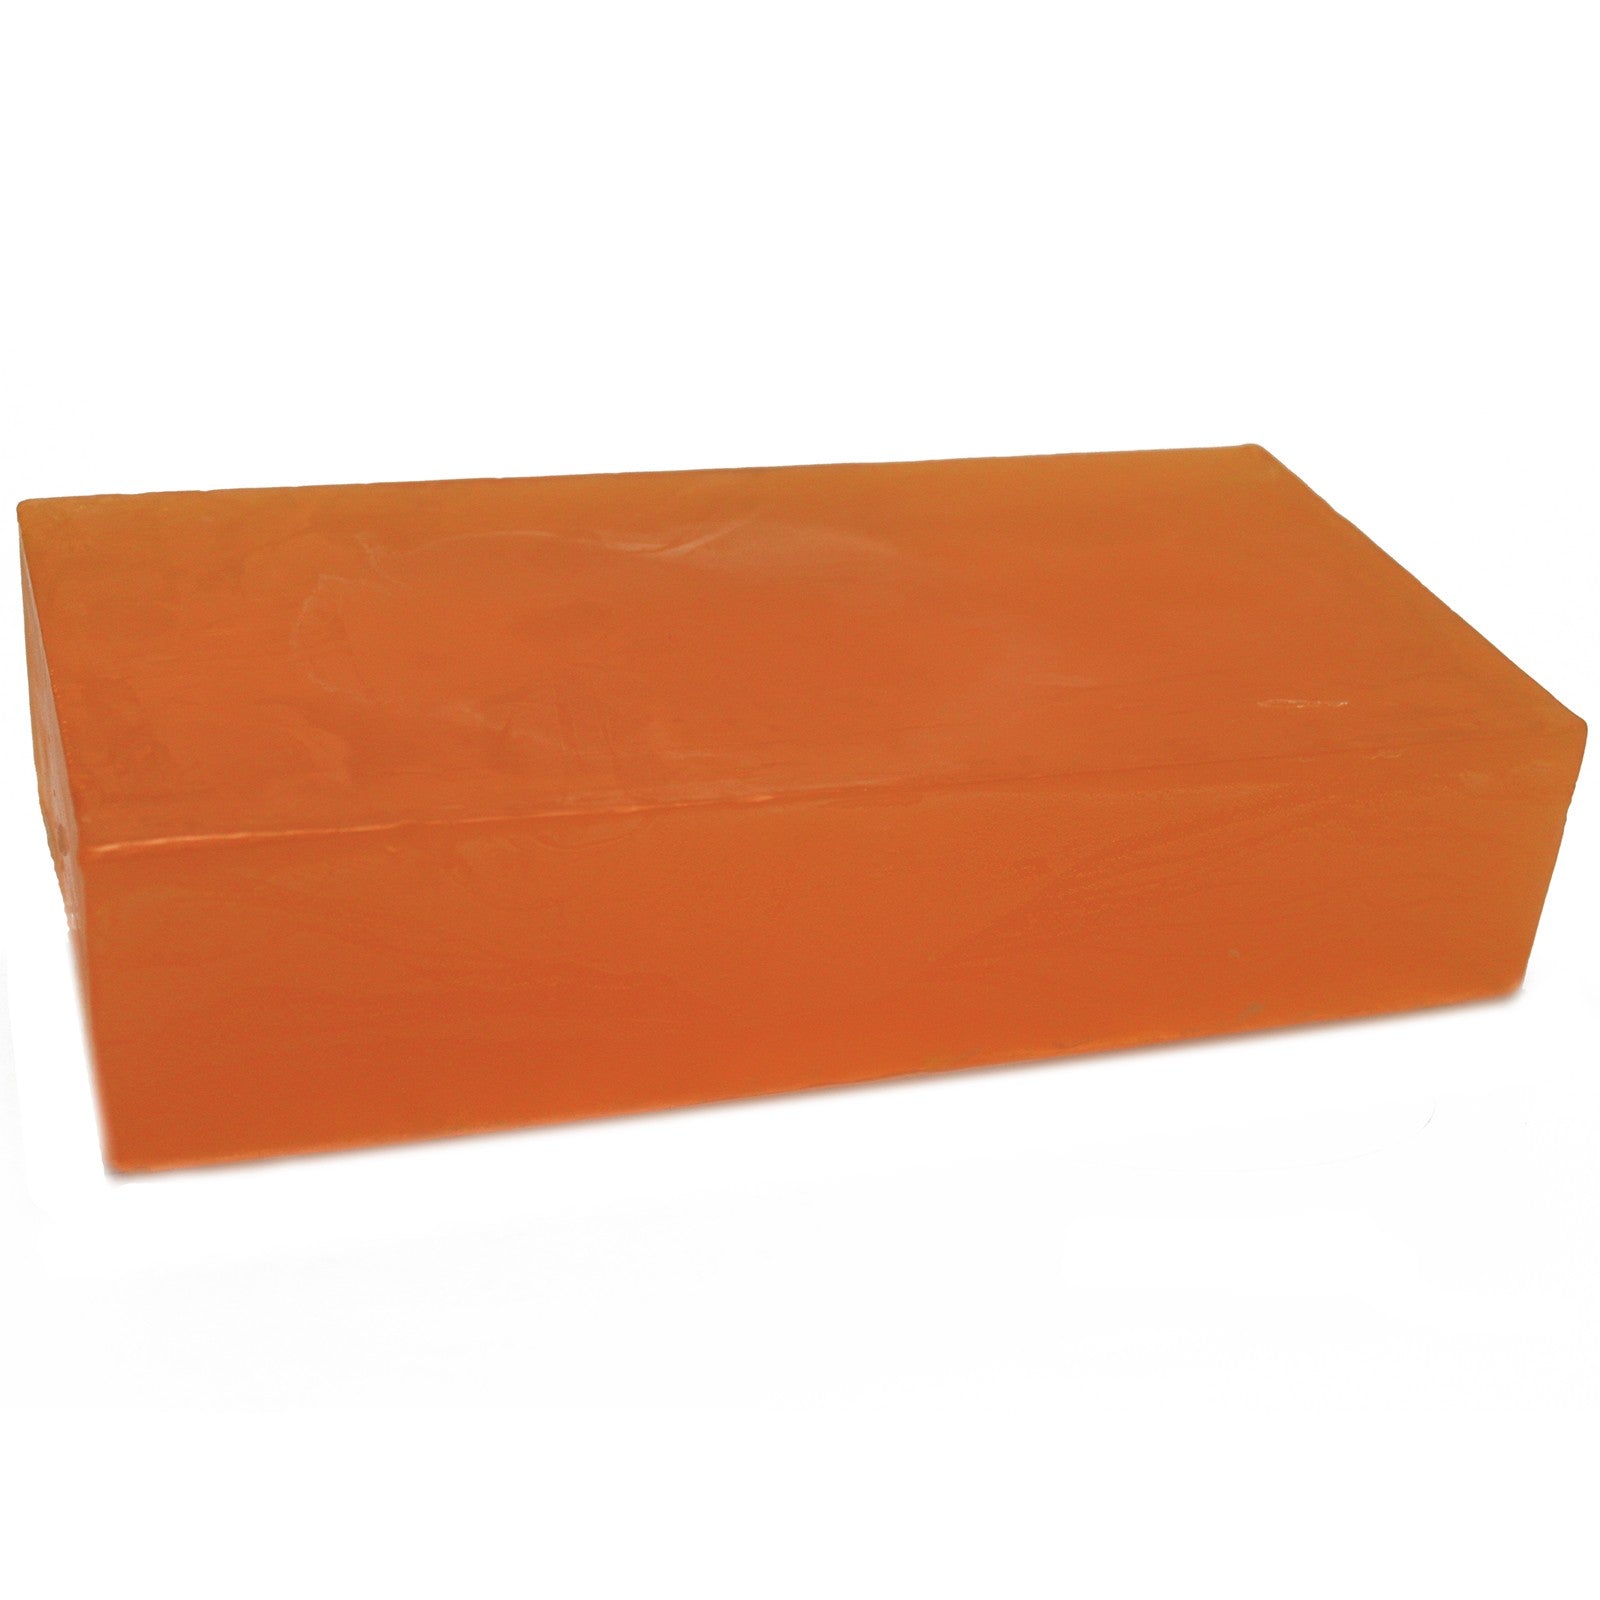 May Chang Essential Oil Soap Loaf - 2kg - £45.0 - 